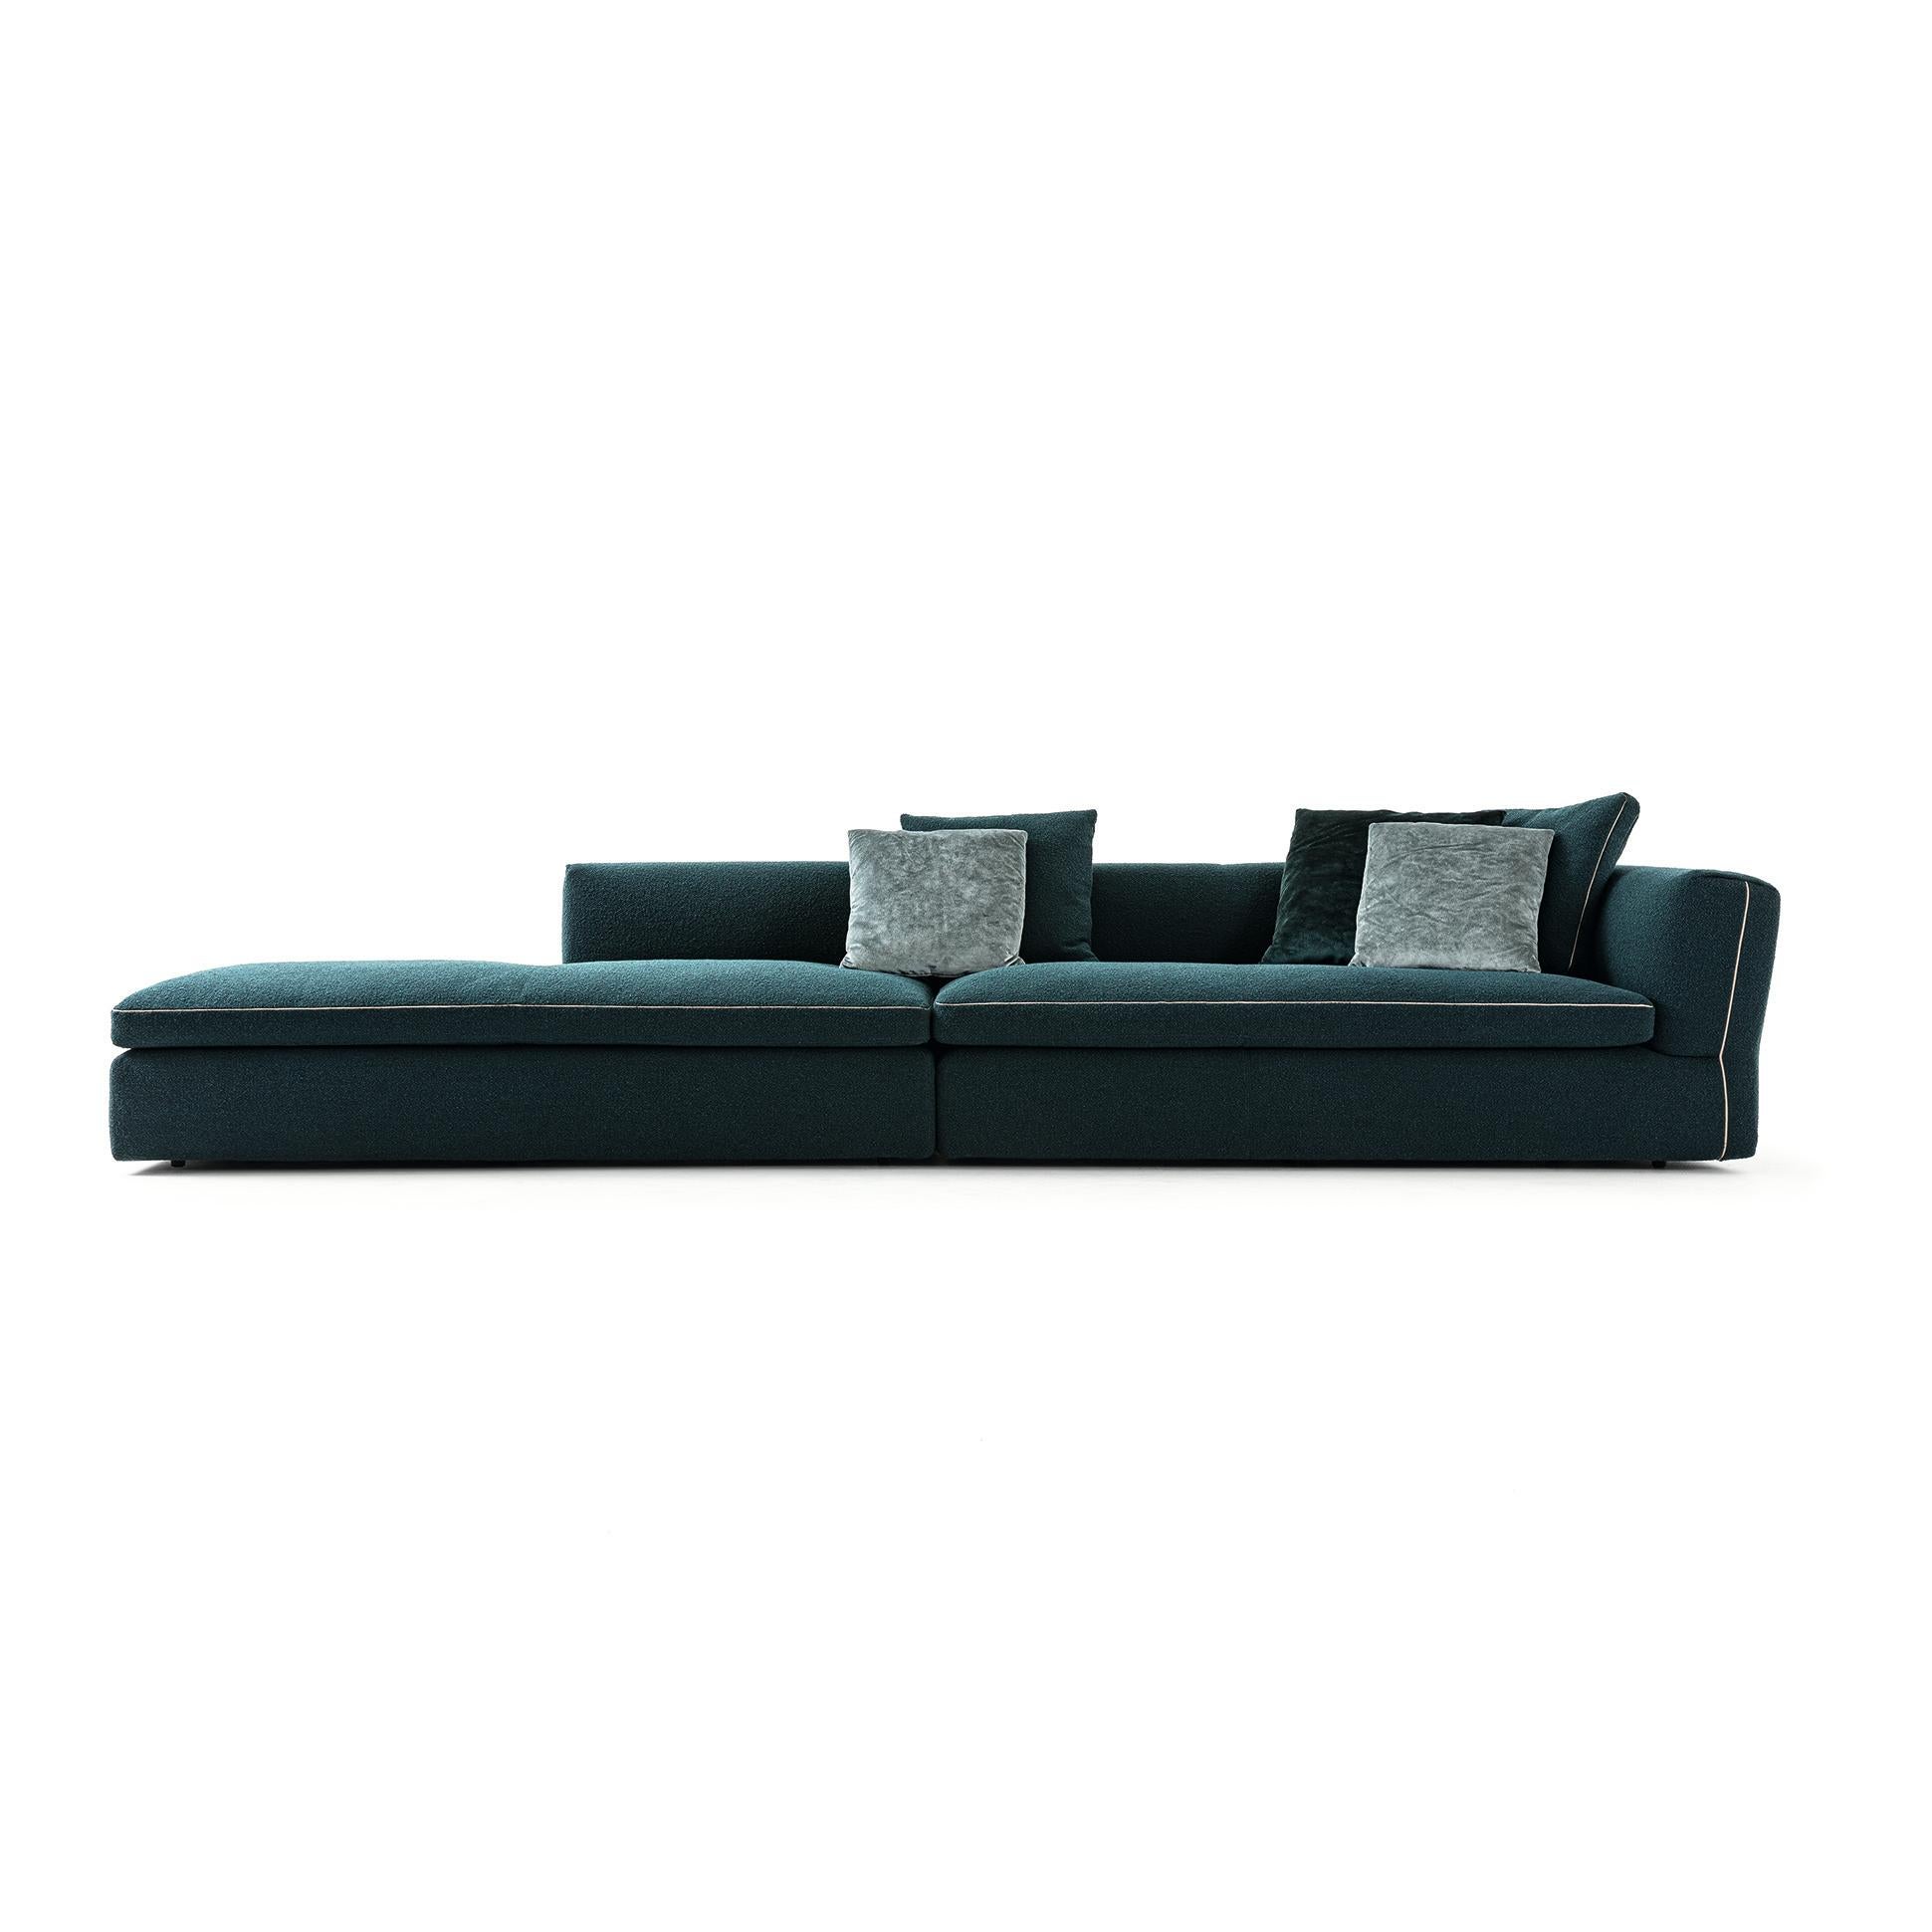 Sofa designed by Rodolfo Dordini in 2019. Manufactured by Cassina in Italy.

A sophisticated haute couture design featuring elegant details reminiscent of classic fine tailoring. Special stitiching around the seams on the backrest/armrest creates